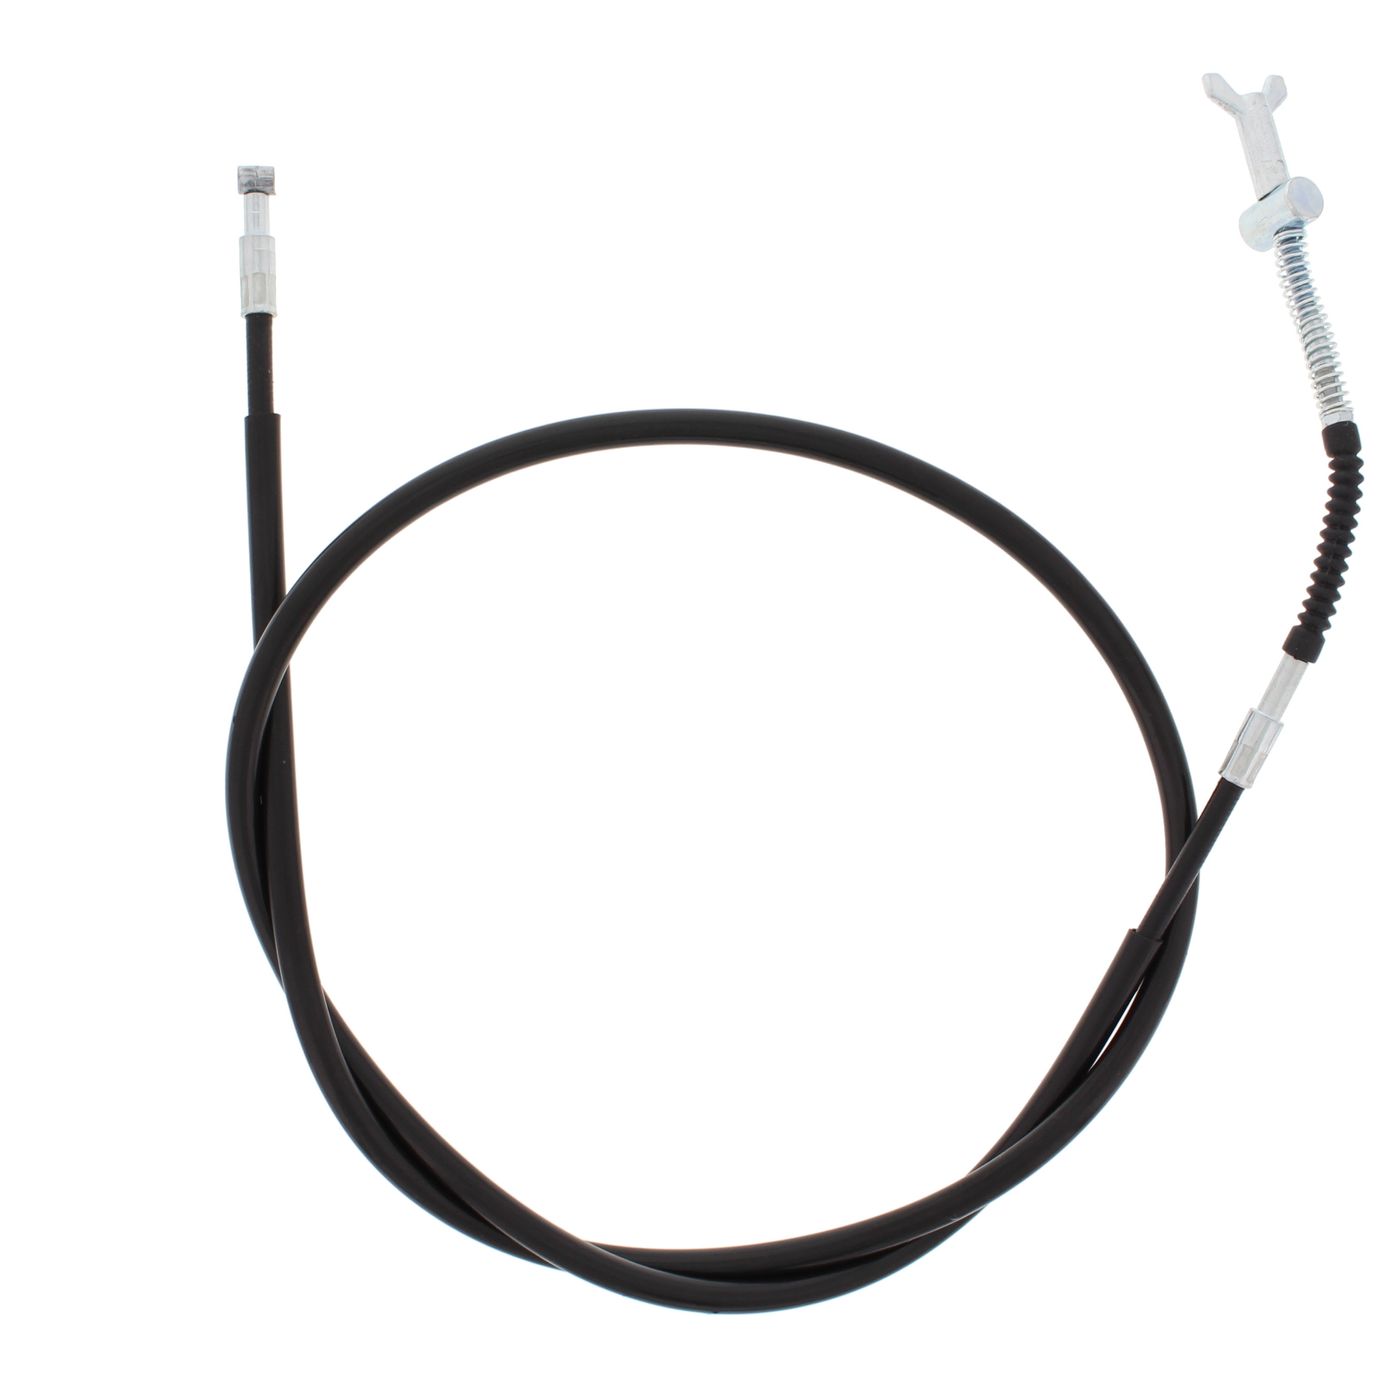 Wrp Brake Cables - WRP454071 image